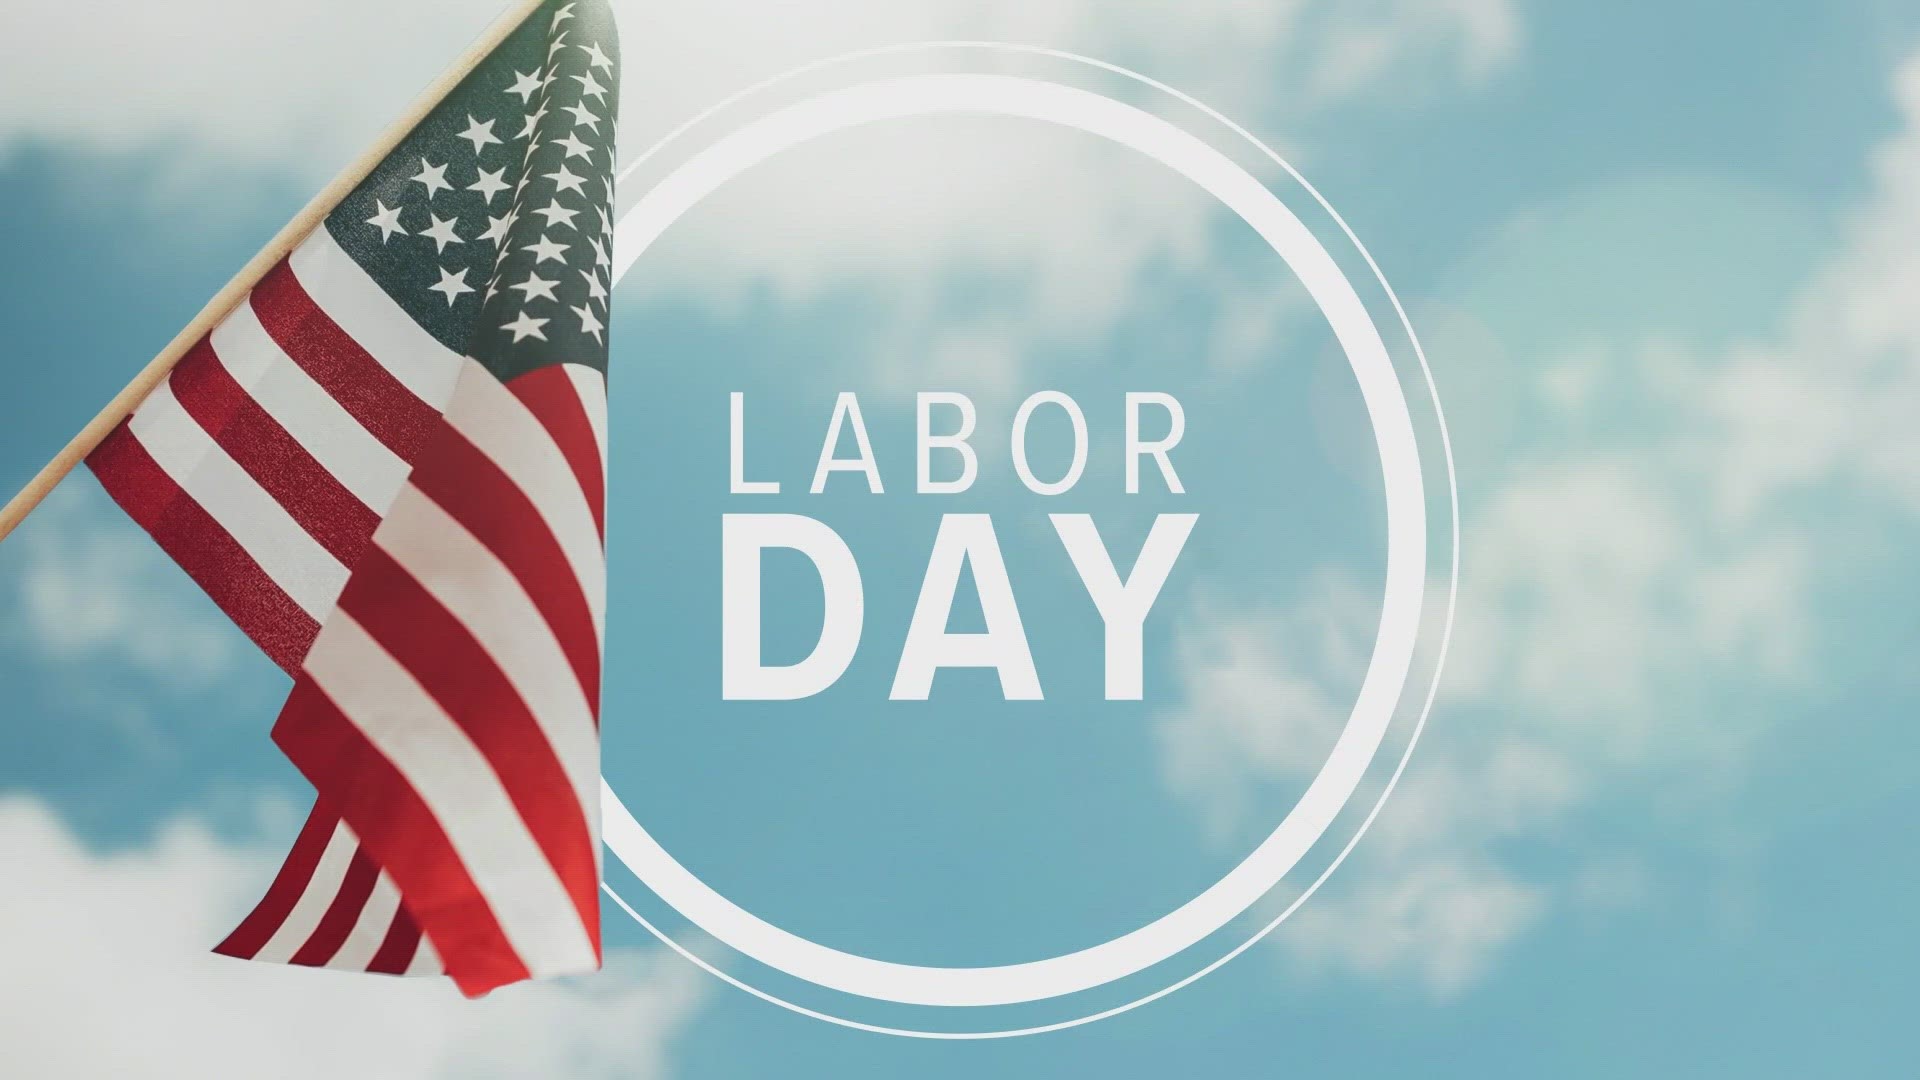 There are still lots to do in the area for Labor Day if you're still in town.